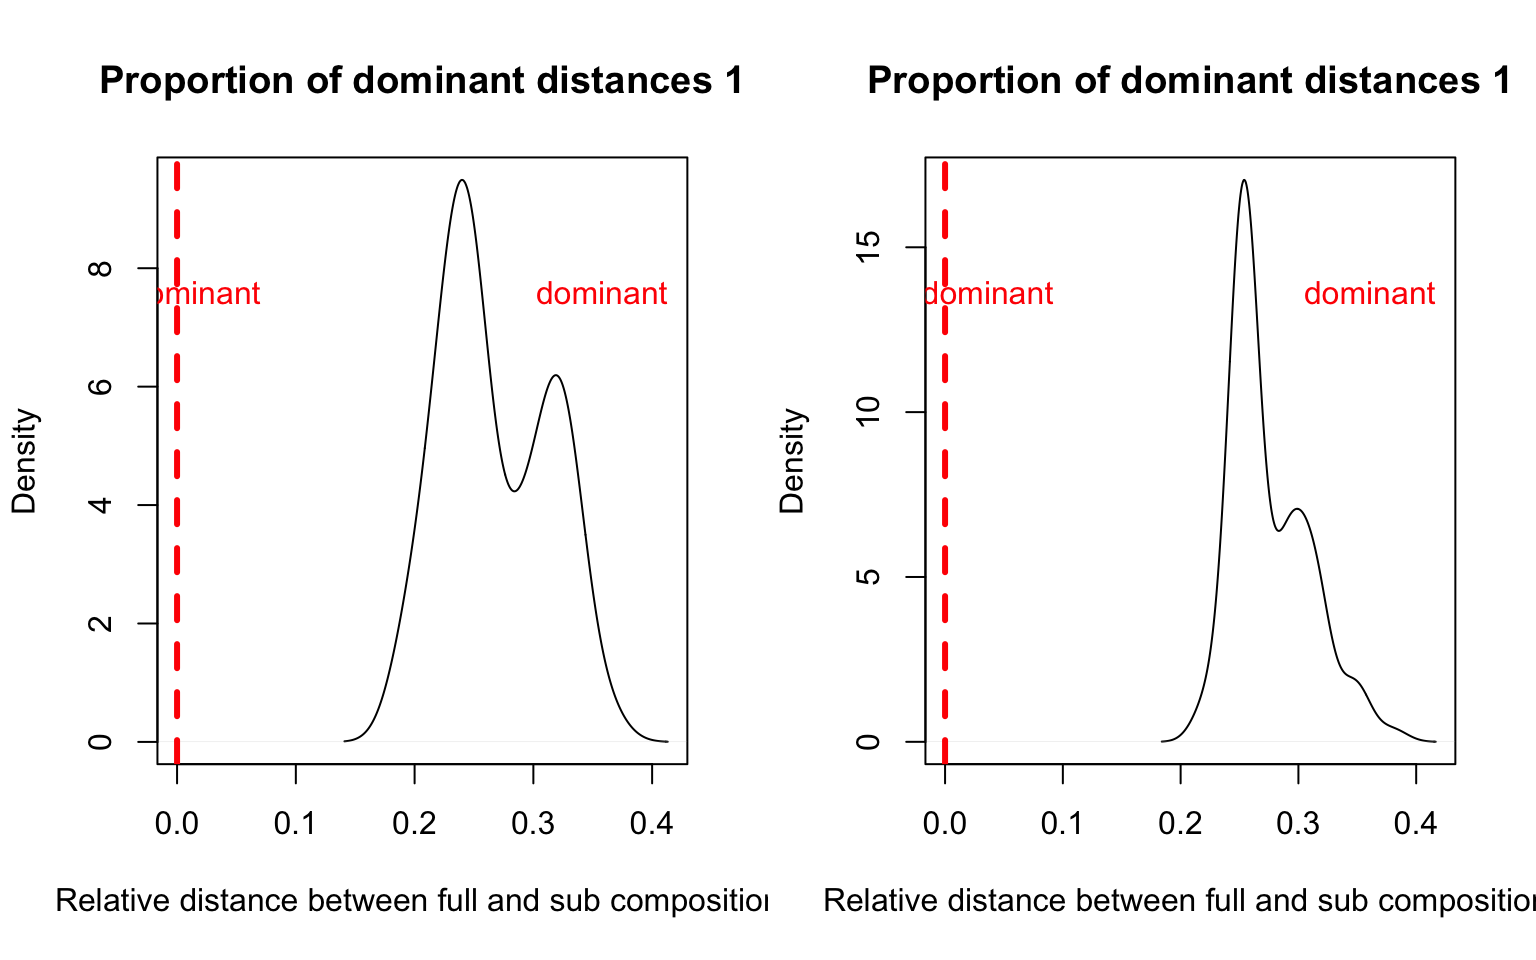 Proportion of dominant distance densities